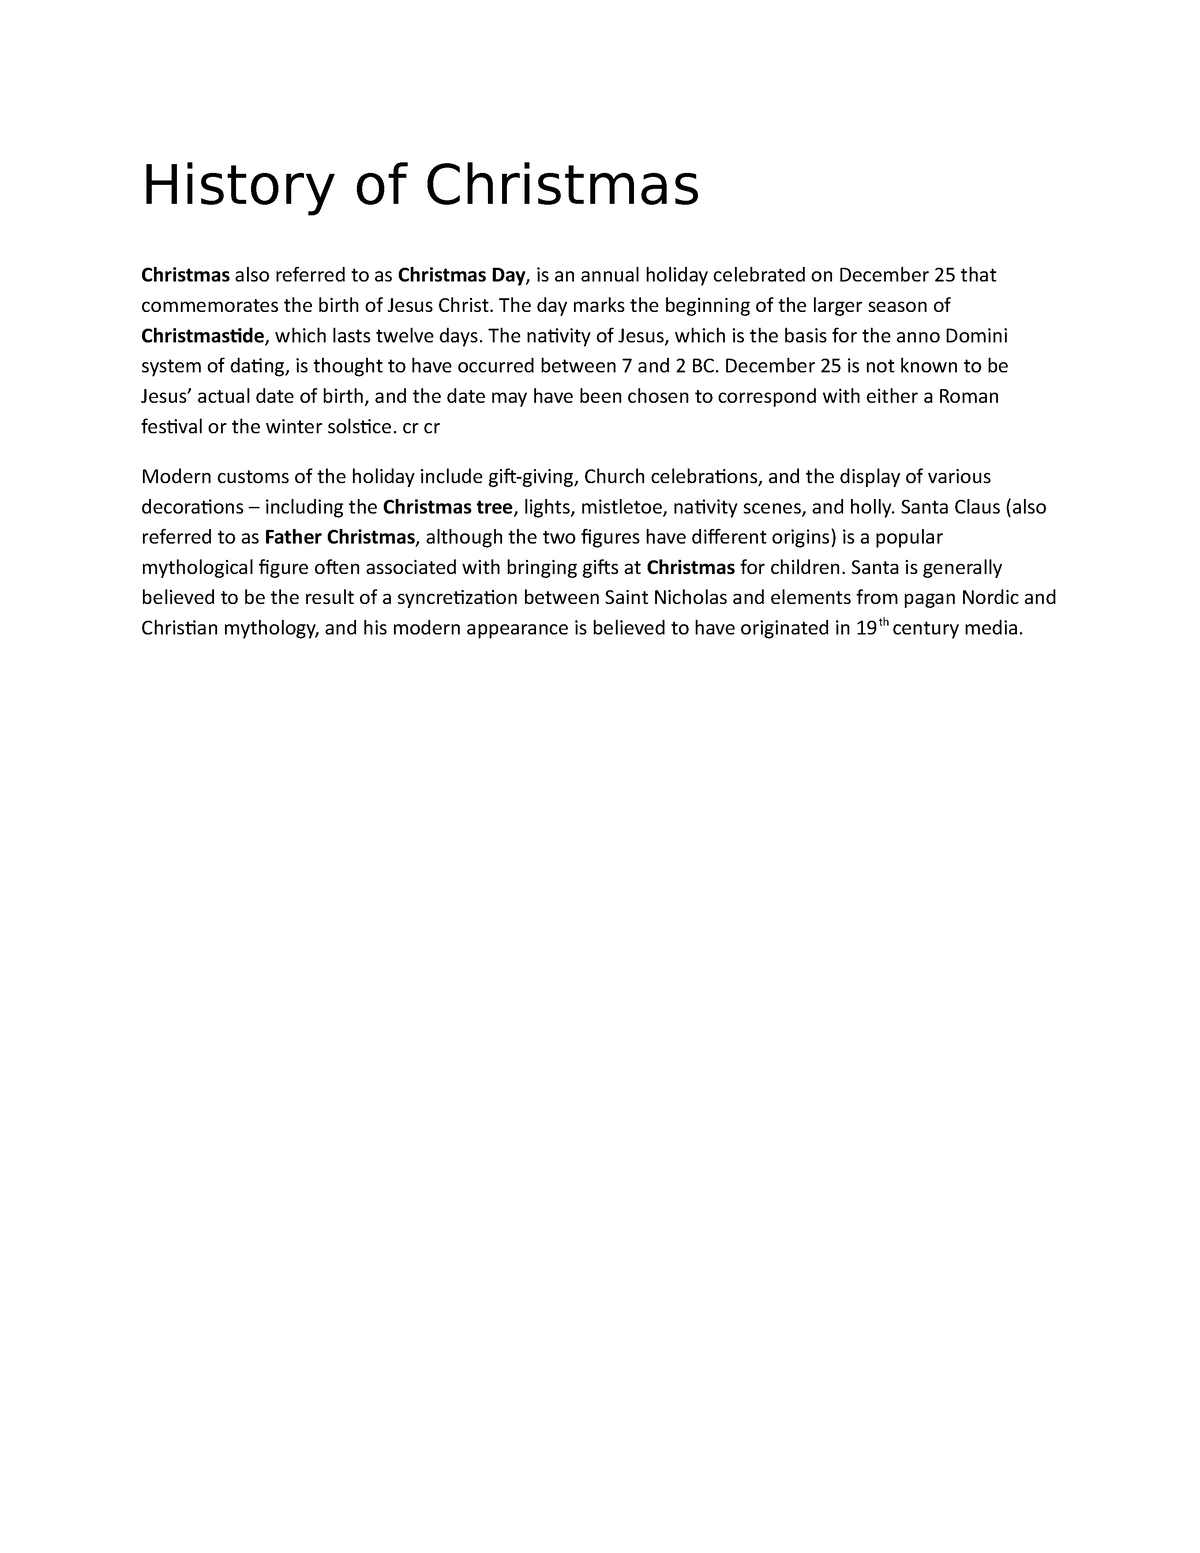 history-of-christmas-history-of-christmas-christmas-also-referred-to